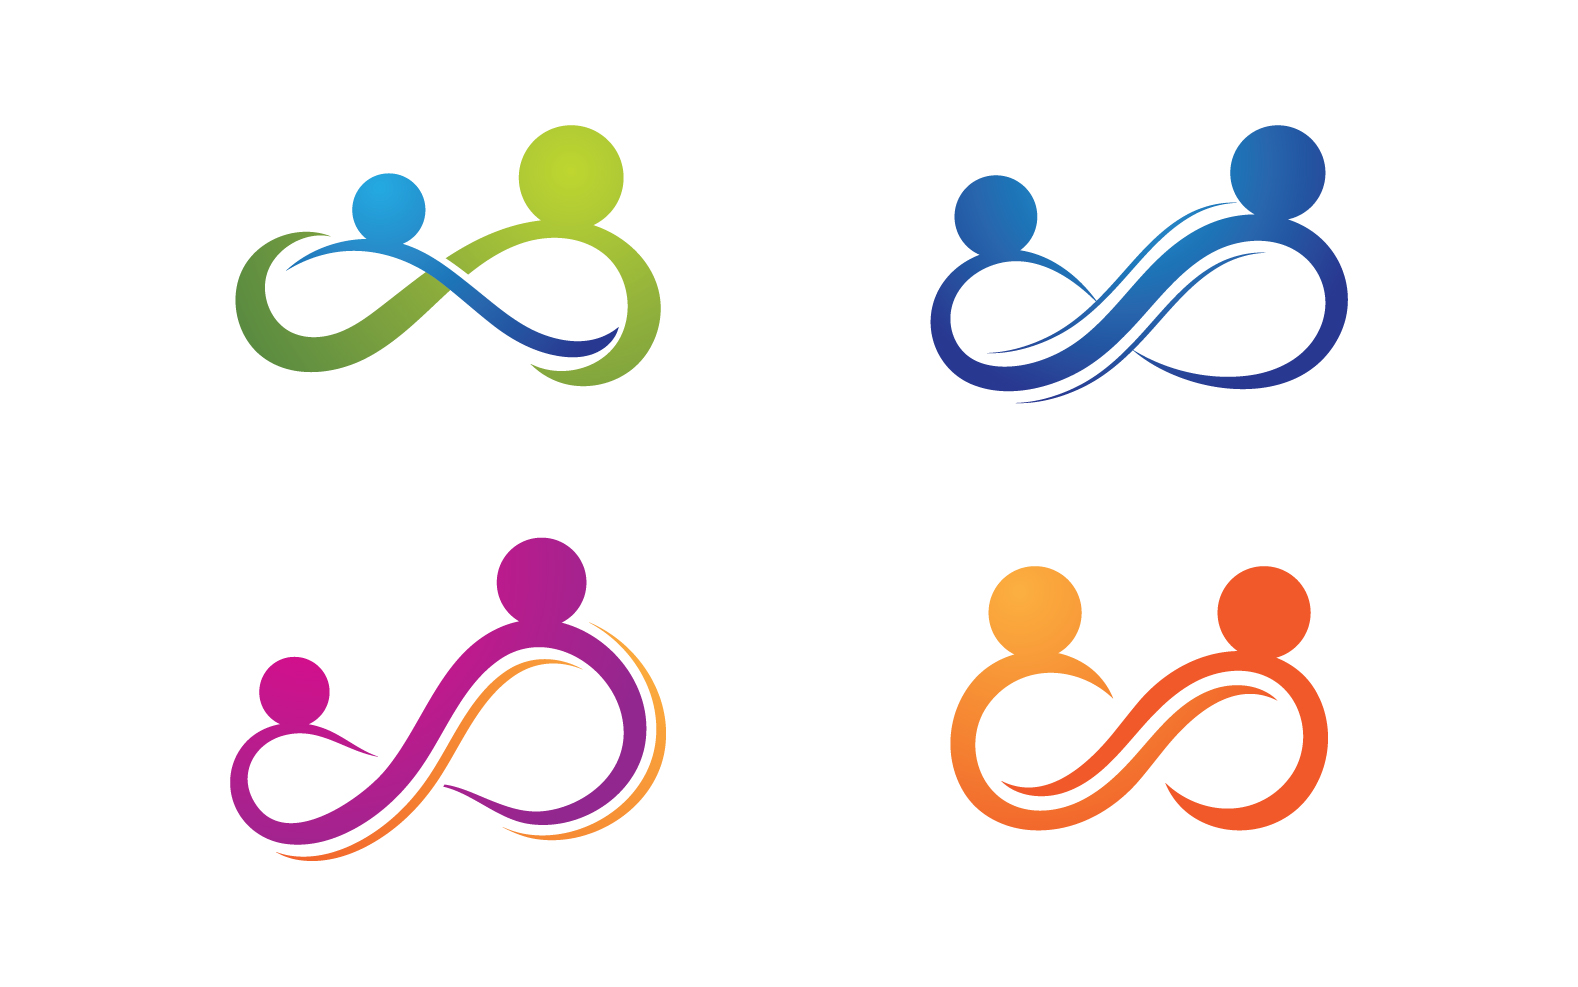 Infinity people team group logo design for company v2